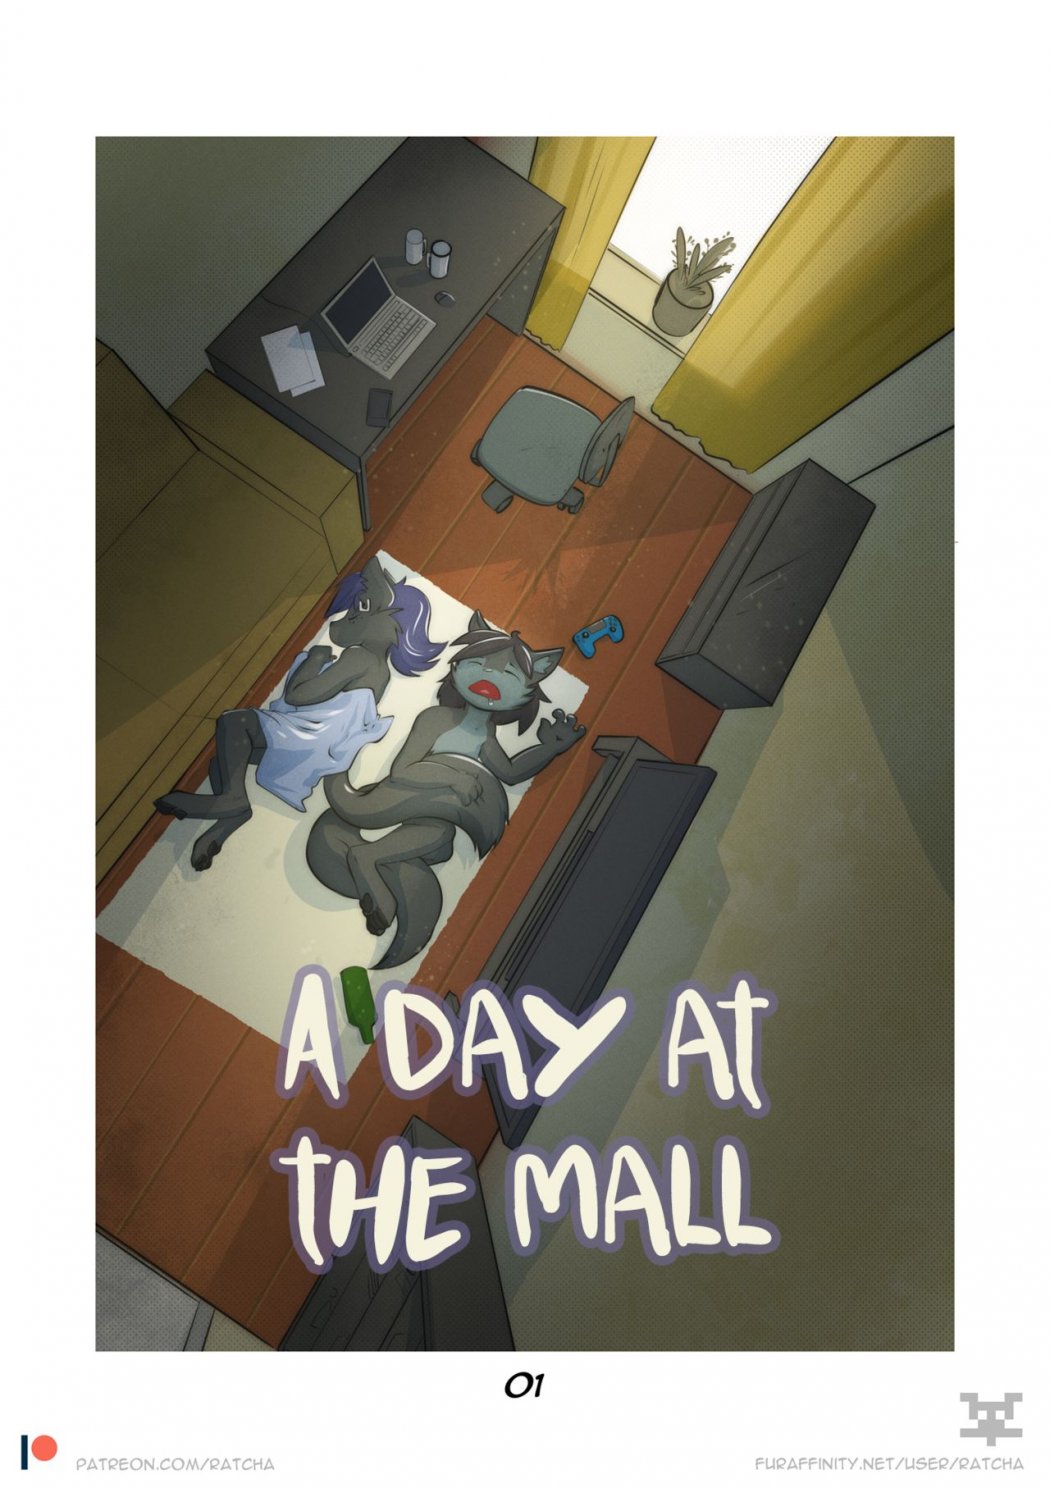 A Day At The Mall